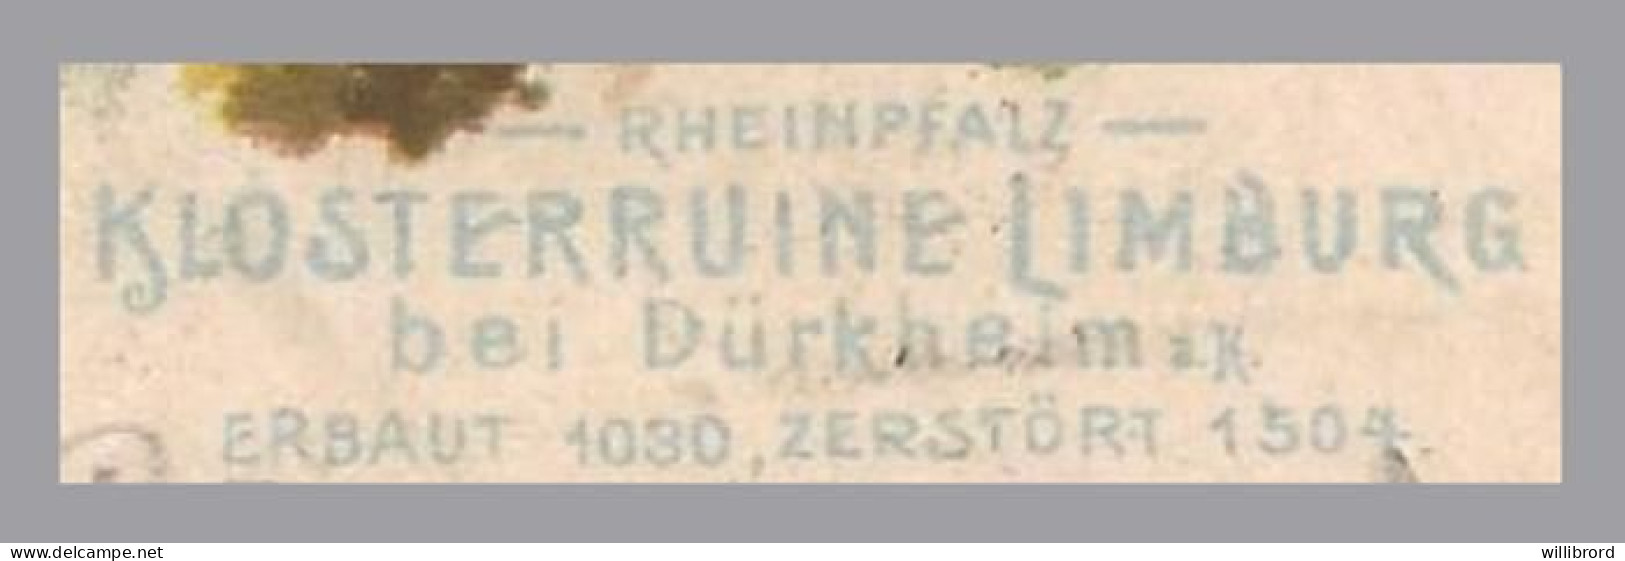 LUXEMBOURG -1900 TWICE REDIRECTED MAIL - Bavaria - Germany - Esch Alzette, Luxembourg - Taxed Cross-border - Impuestos